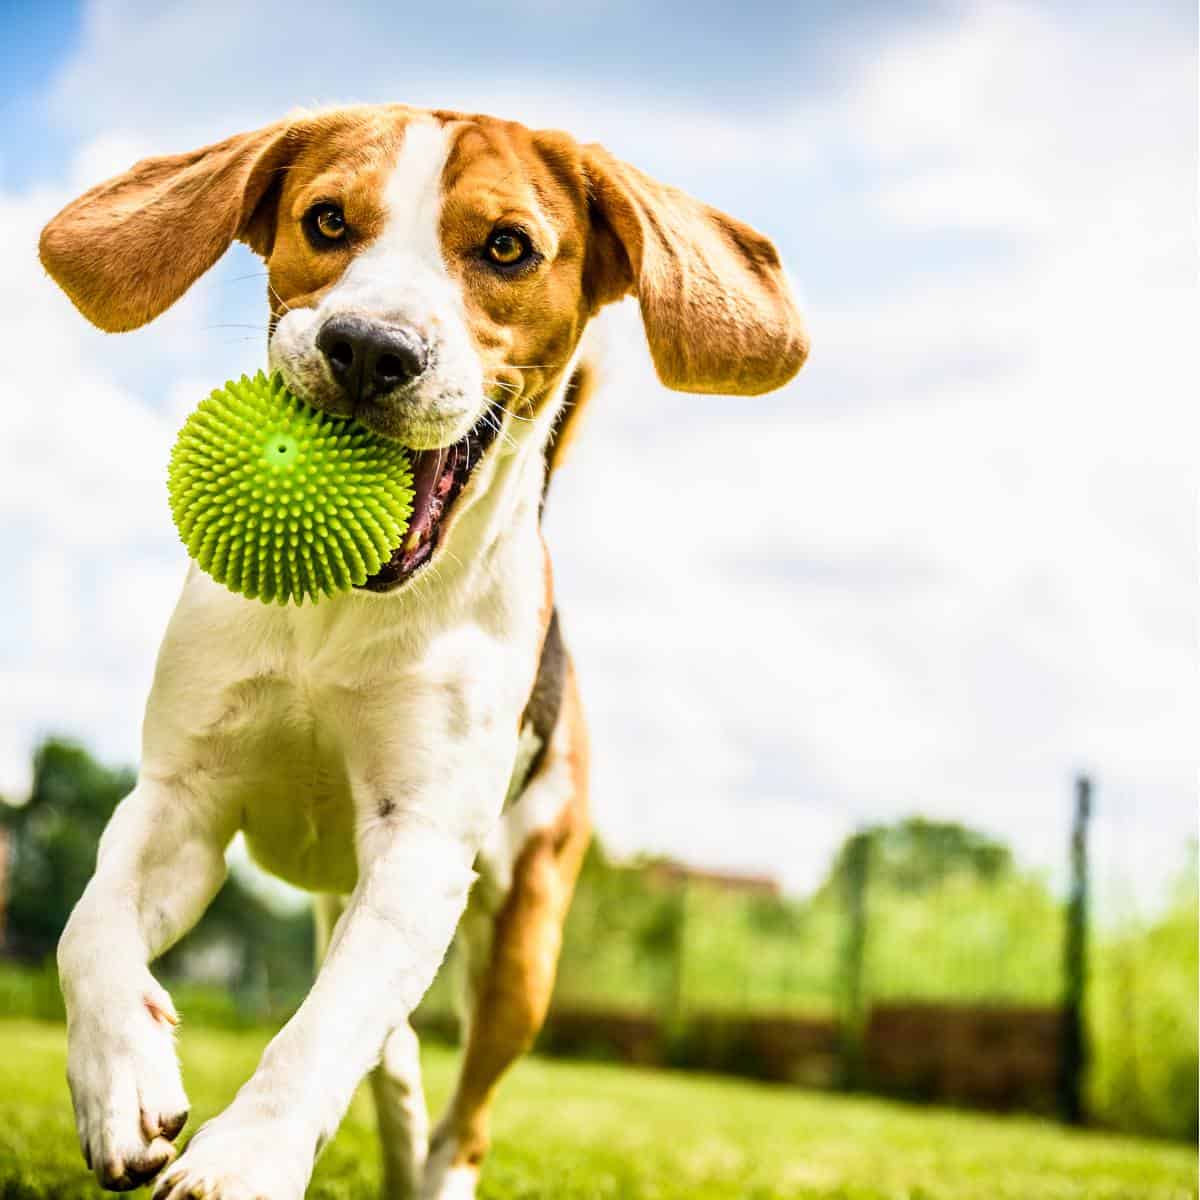 Brown and white happy hound dog type running on grass with a tennis ball in his mouth.